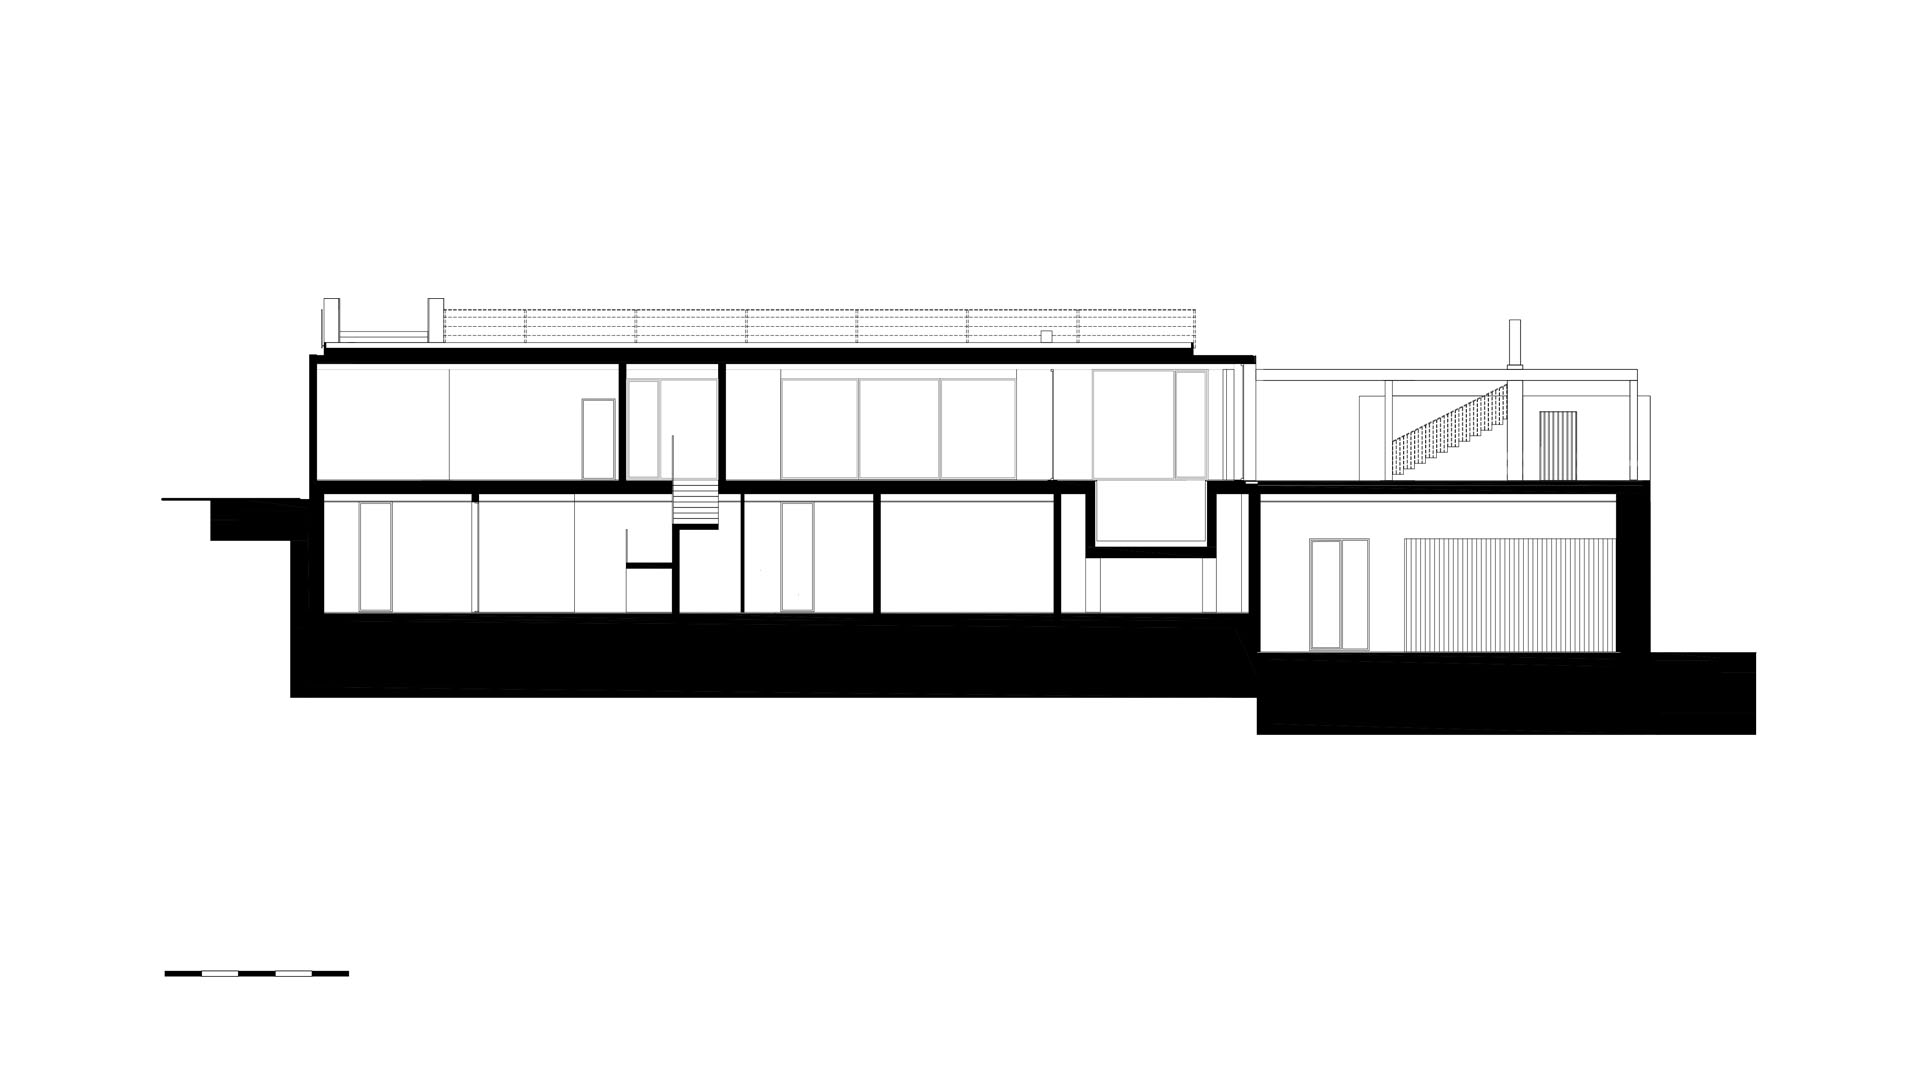 The layout of the house